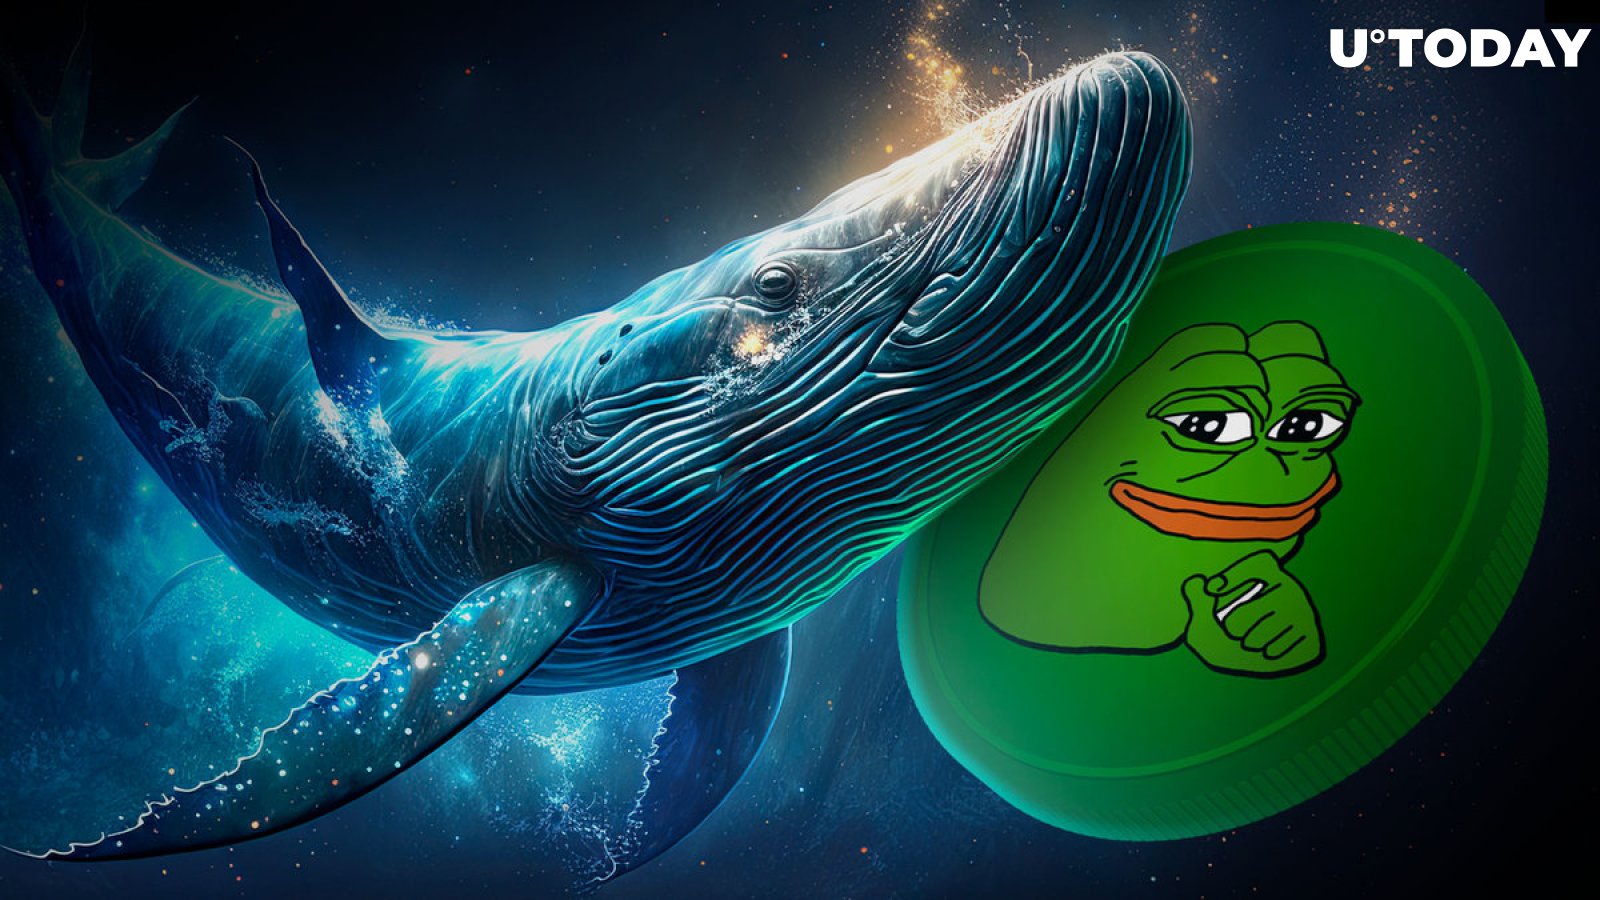 Pepe (PEPE) Price Surges 60% as Whales Surprisingly Buy Again Meme